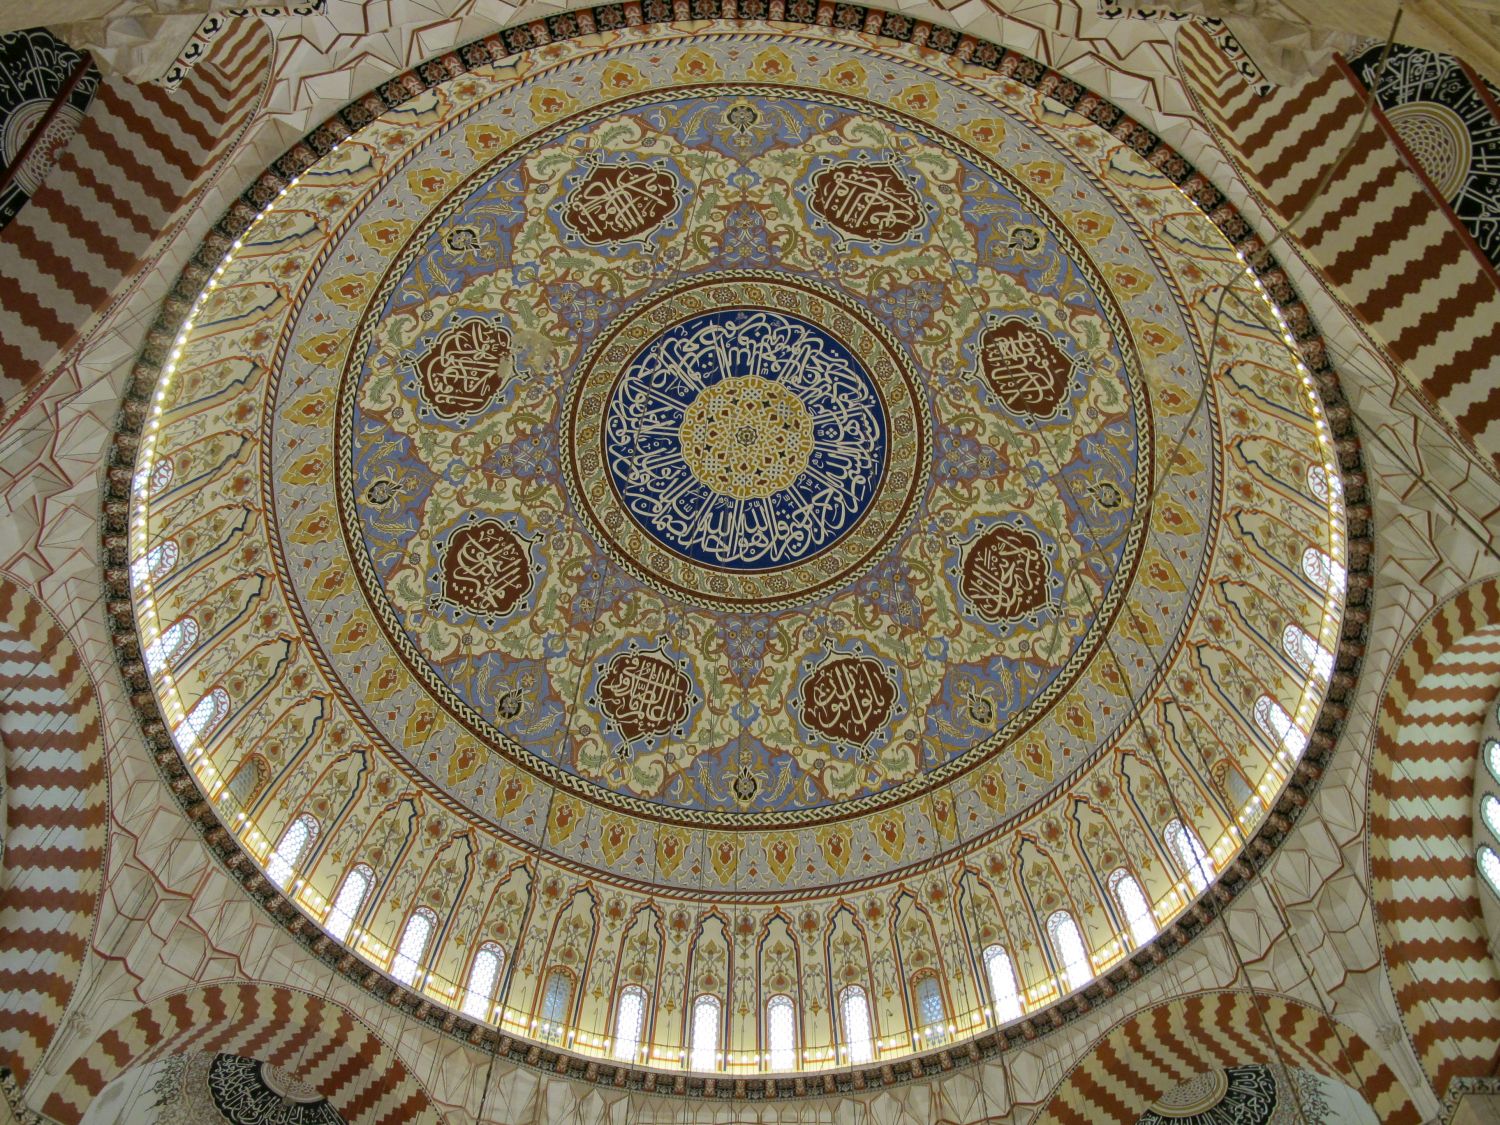 Interior view up at entire central dome, its surface decoration and part of the supporting vaults in alternating red and white stonework